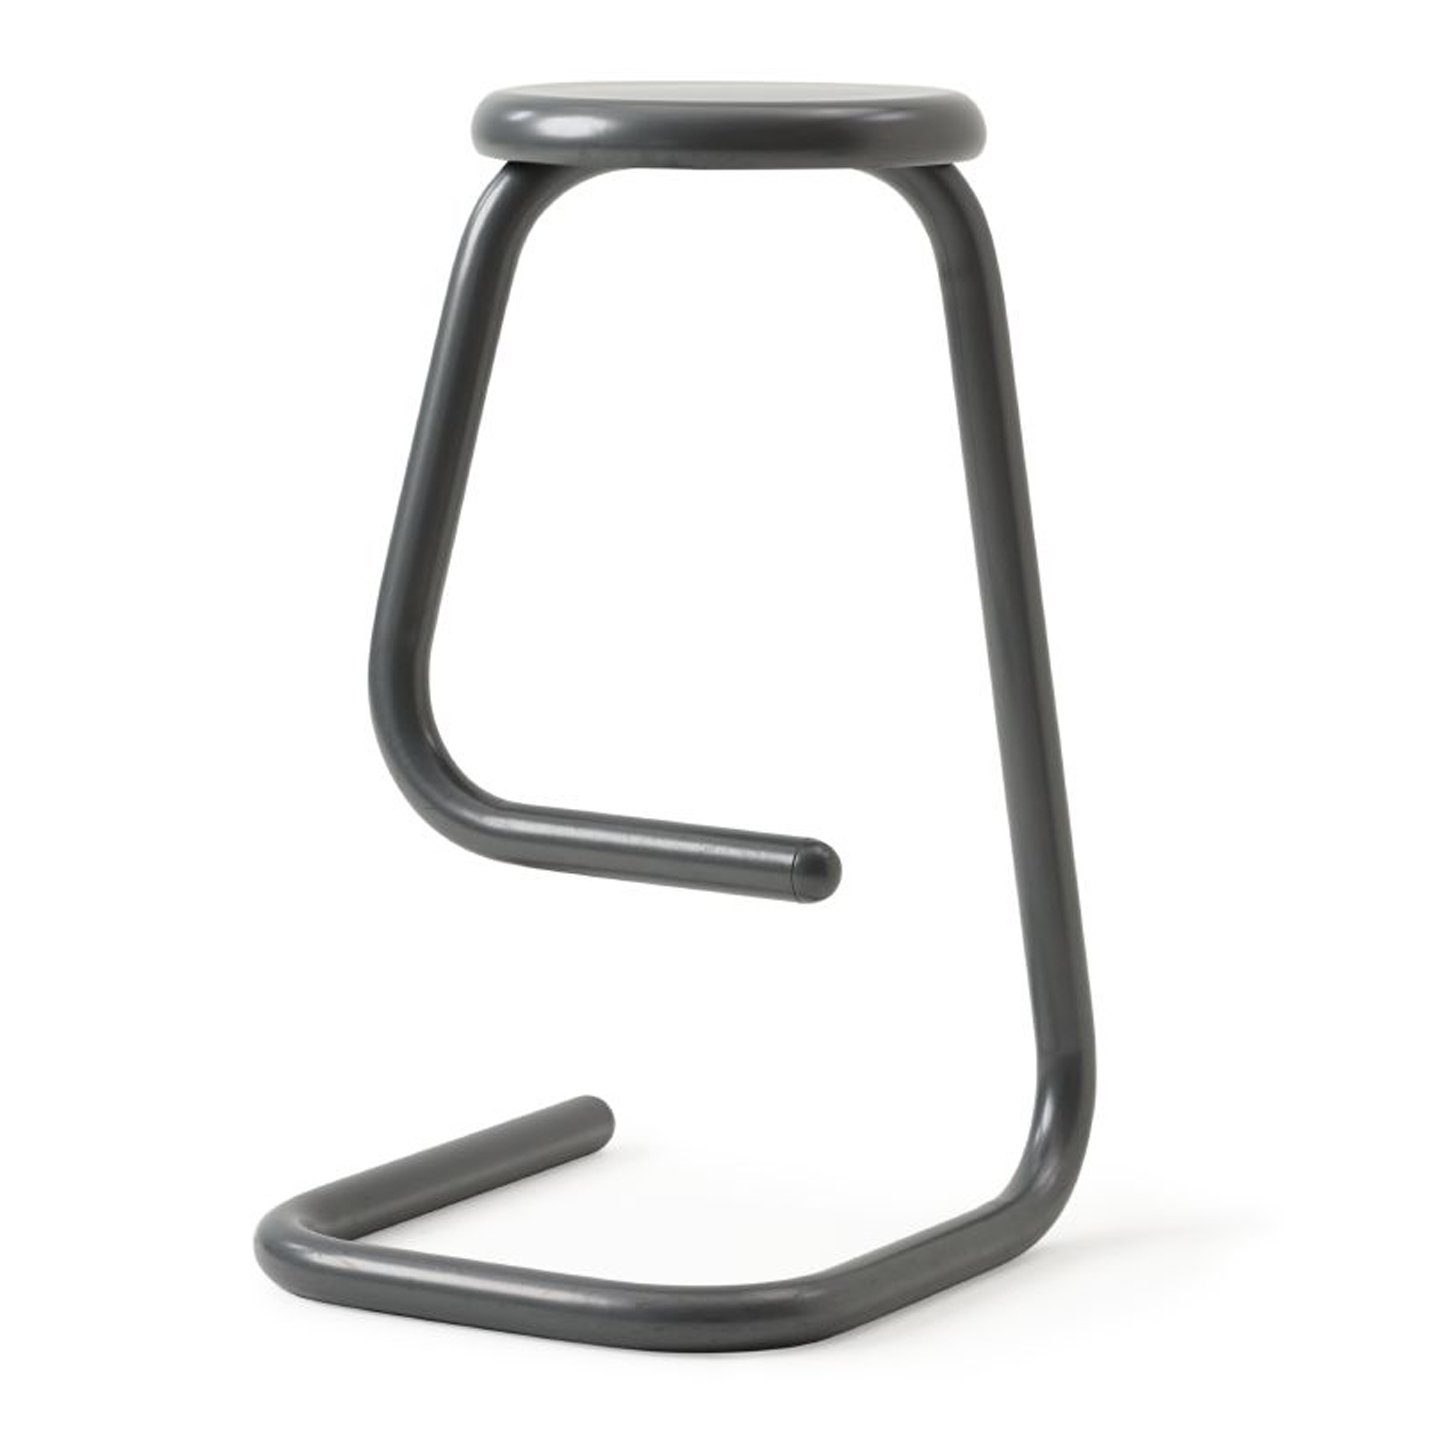 Haworth K700 stool in grey color front view